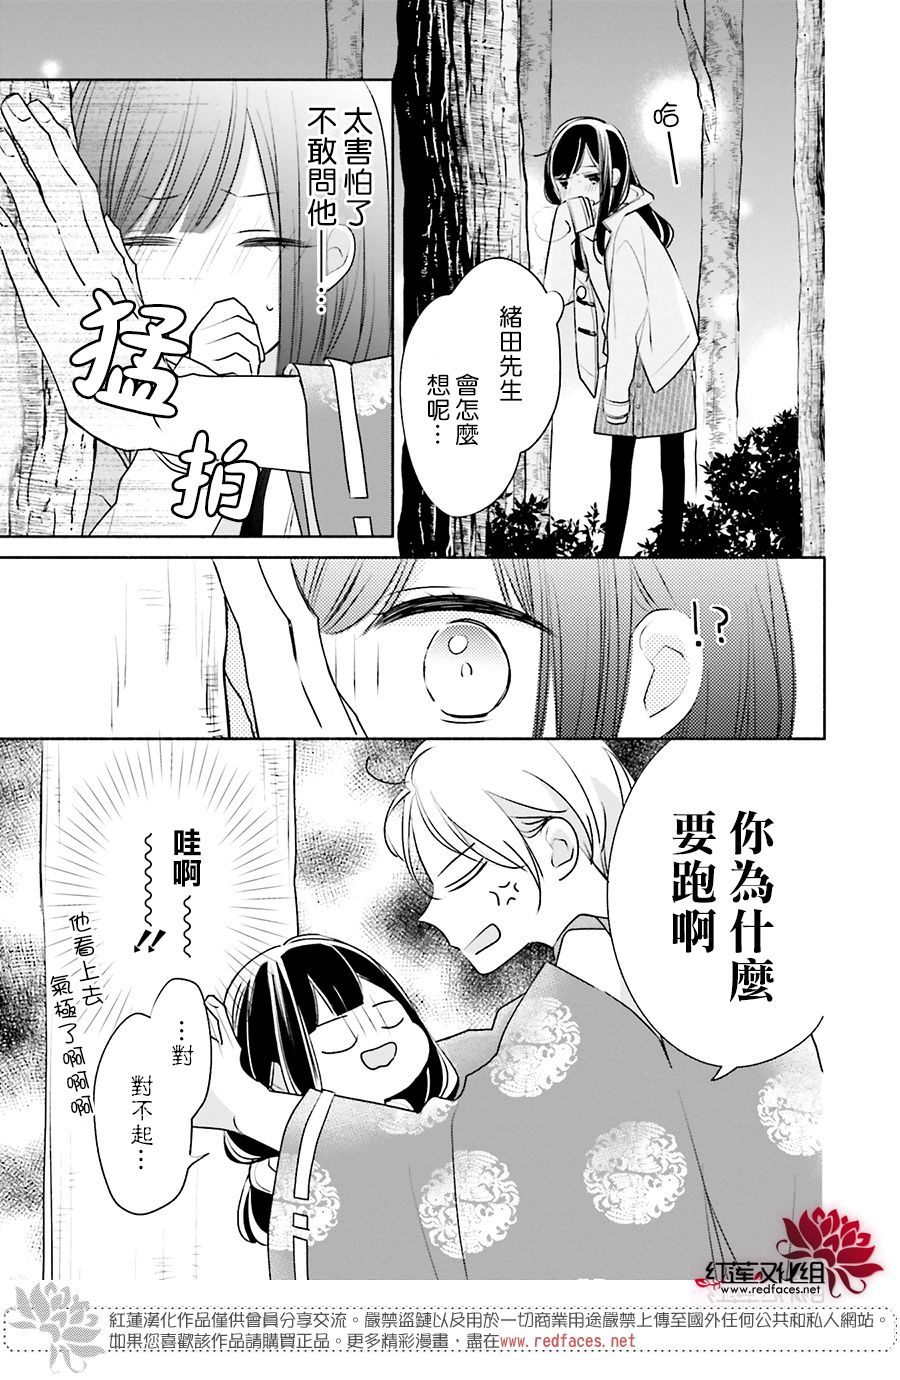 If given a second chance - 24話 - 4